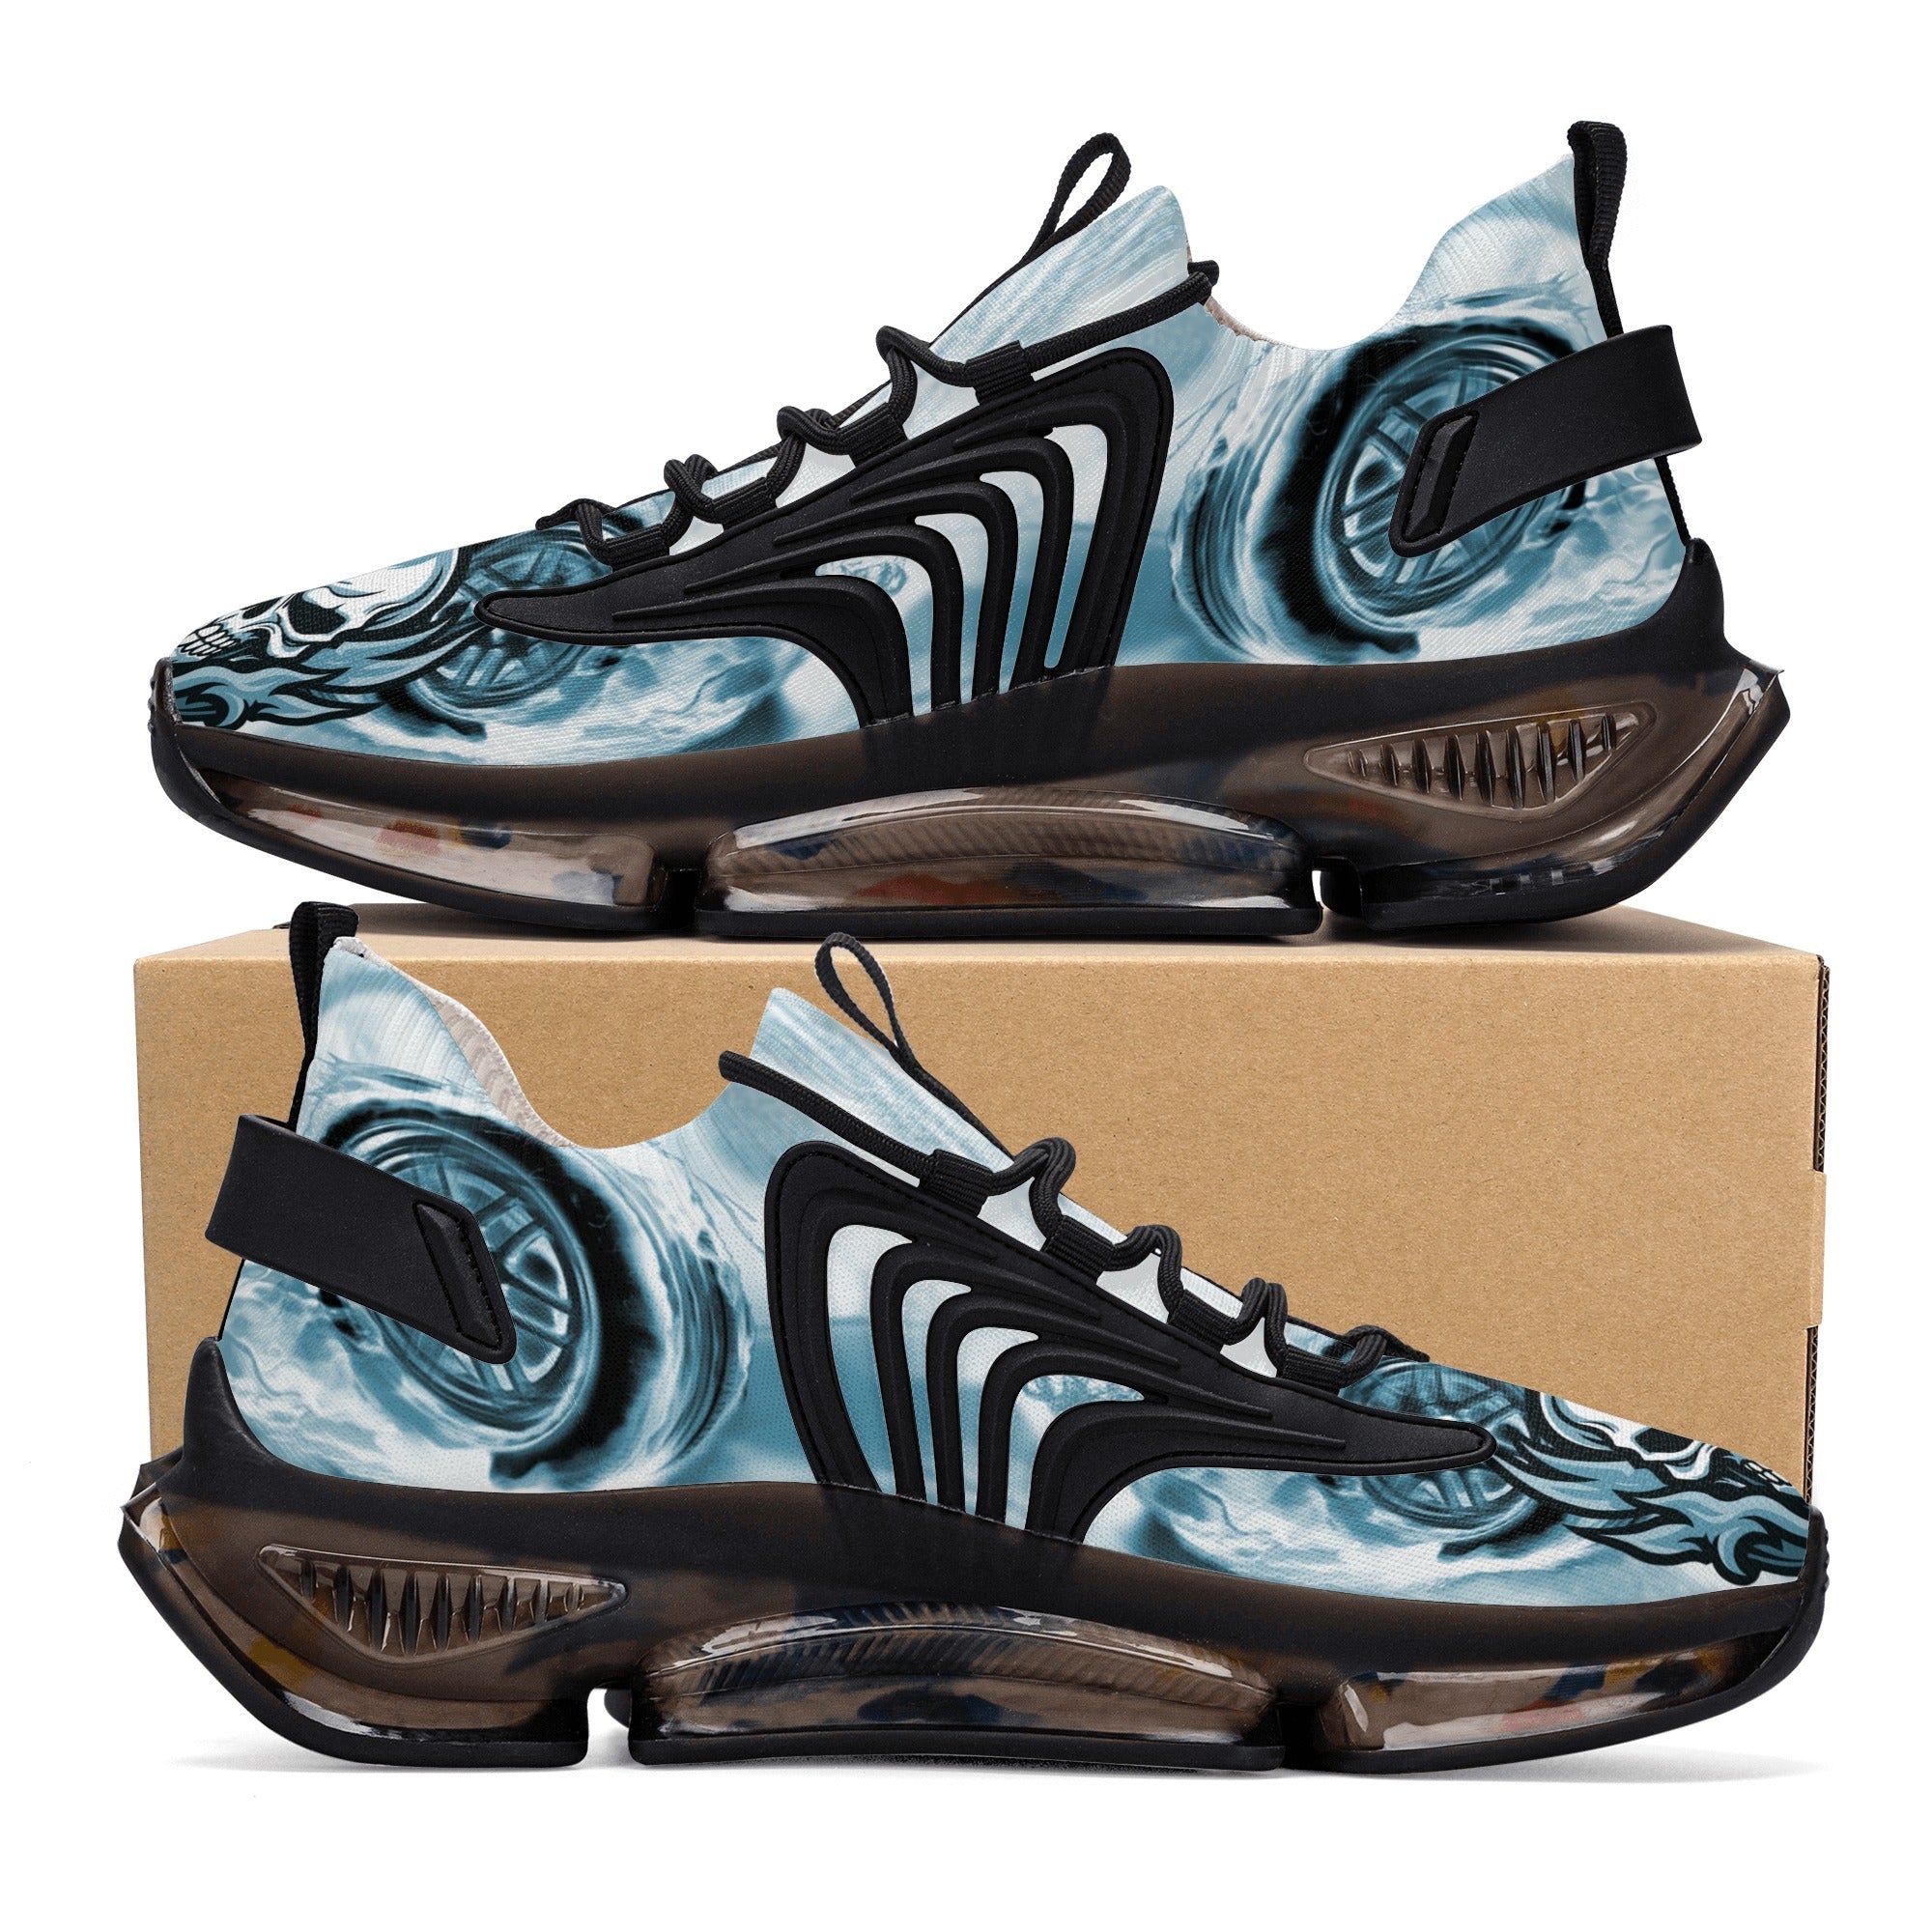    blue-flaming-skull-flaming-wheels-best-womens-react-heel-running-shoes-comfort-style-inside-outside-view-heroicu-brand